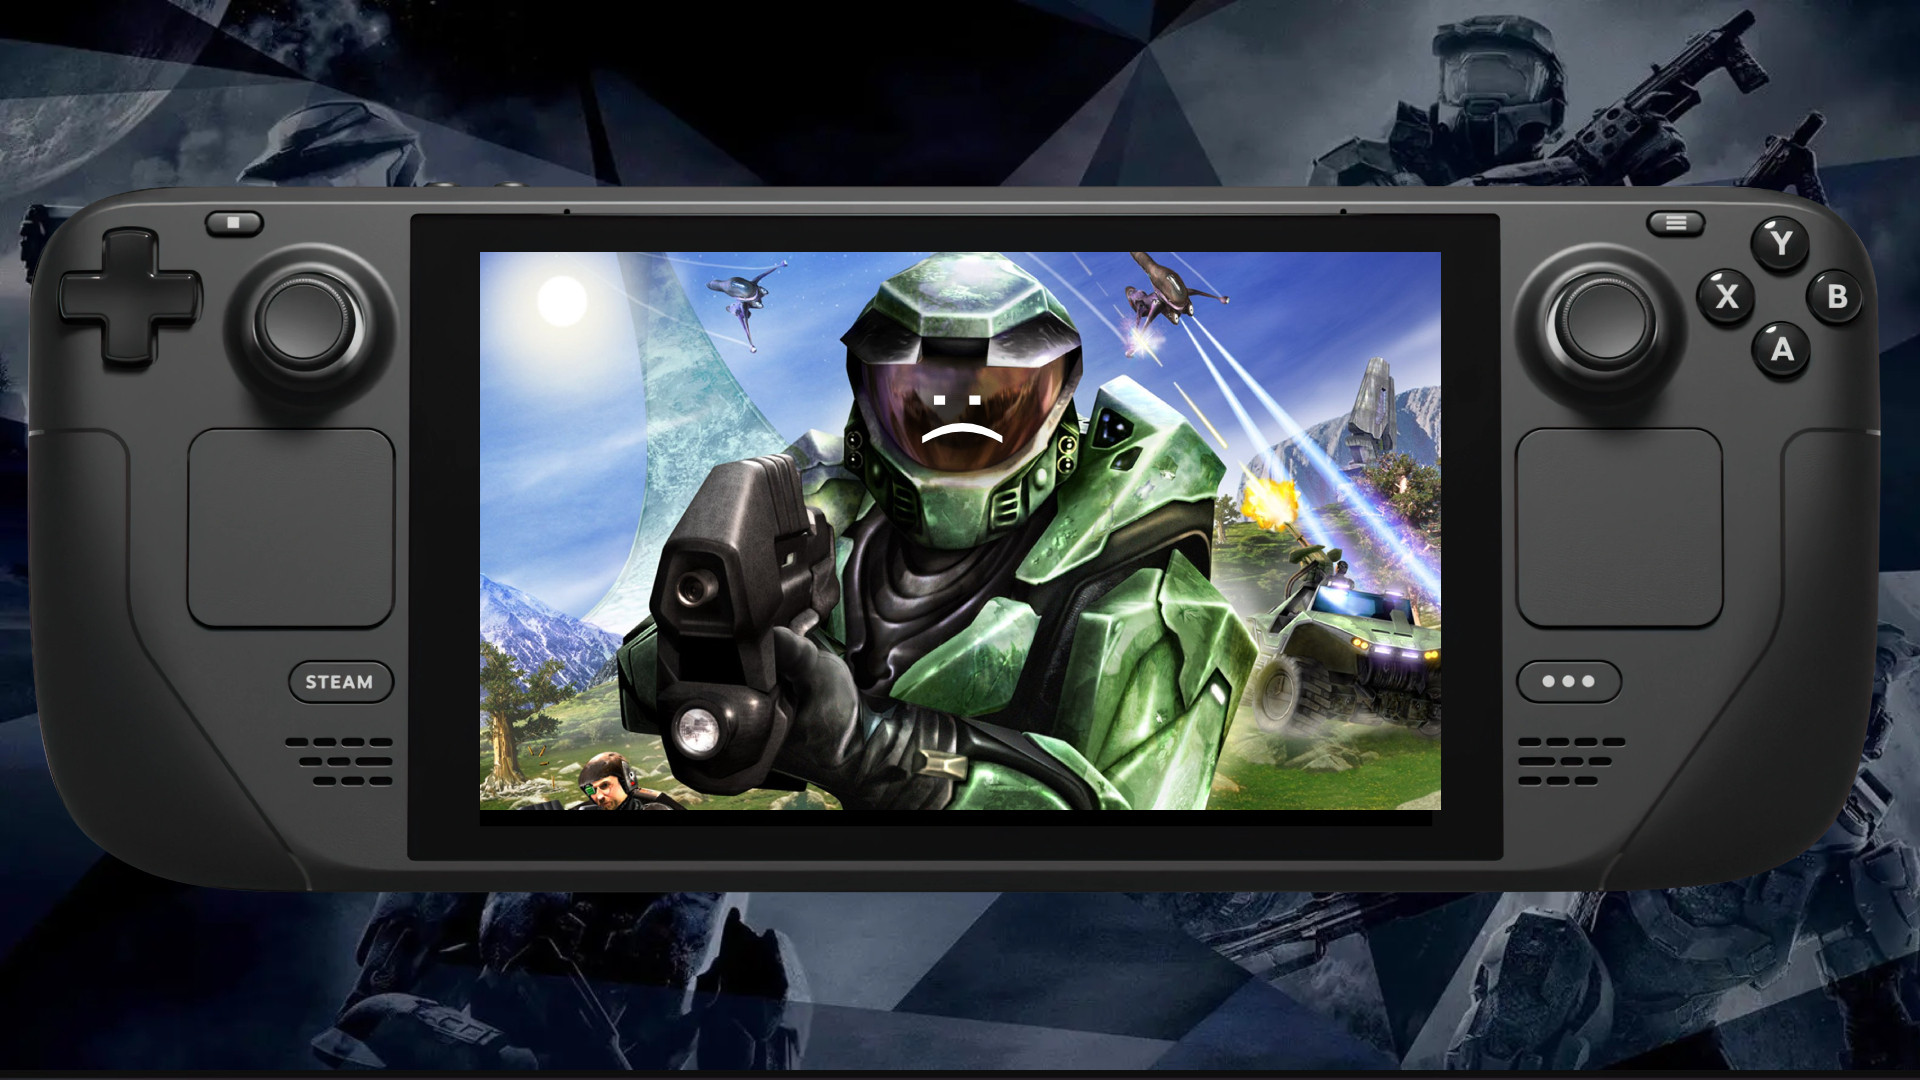 Halo MCC update breaks the game on Steam Deck and Proton